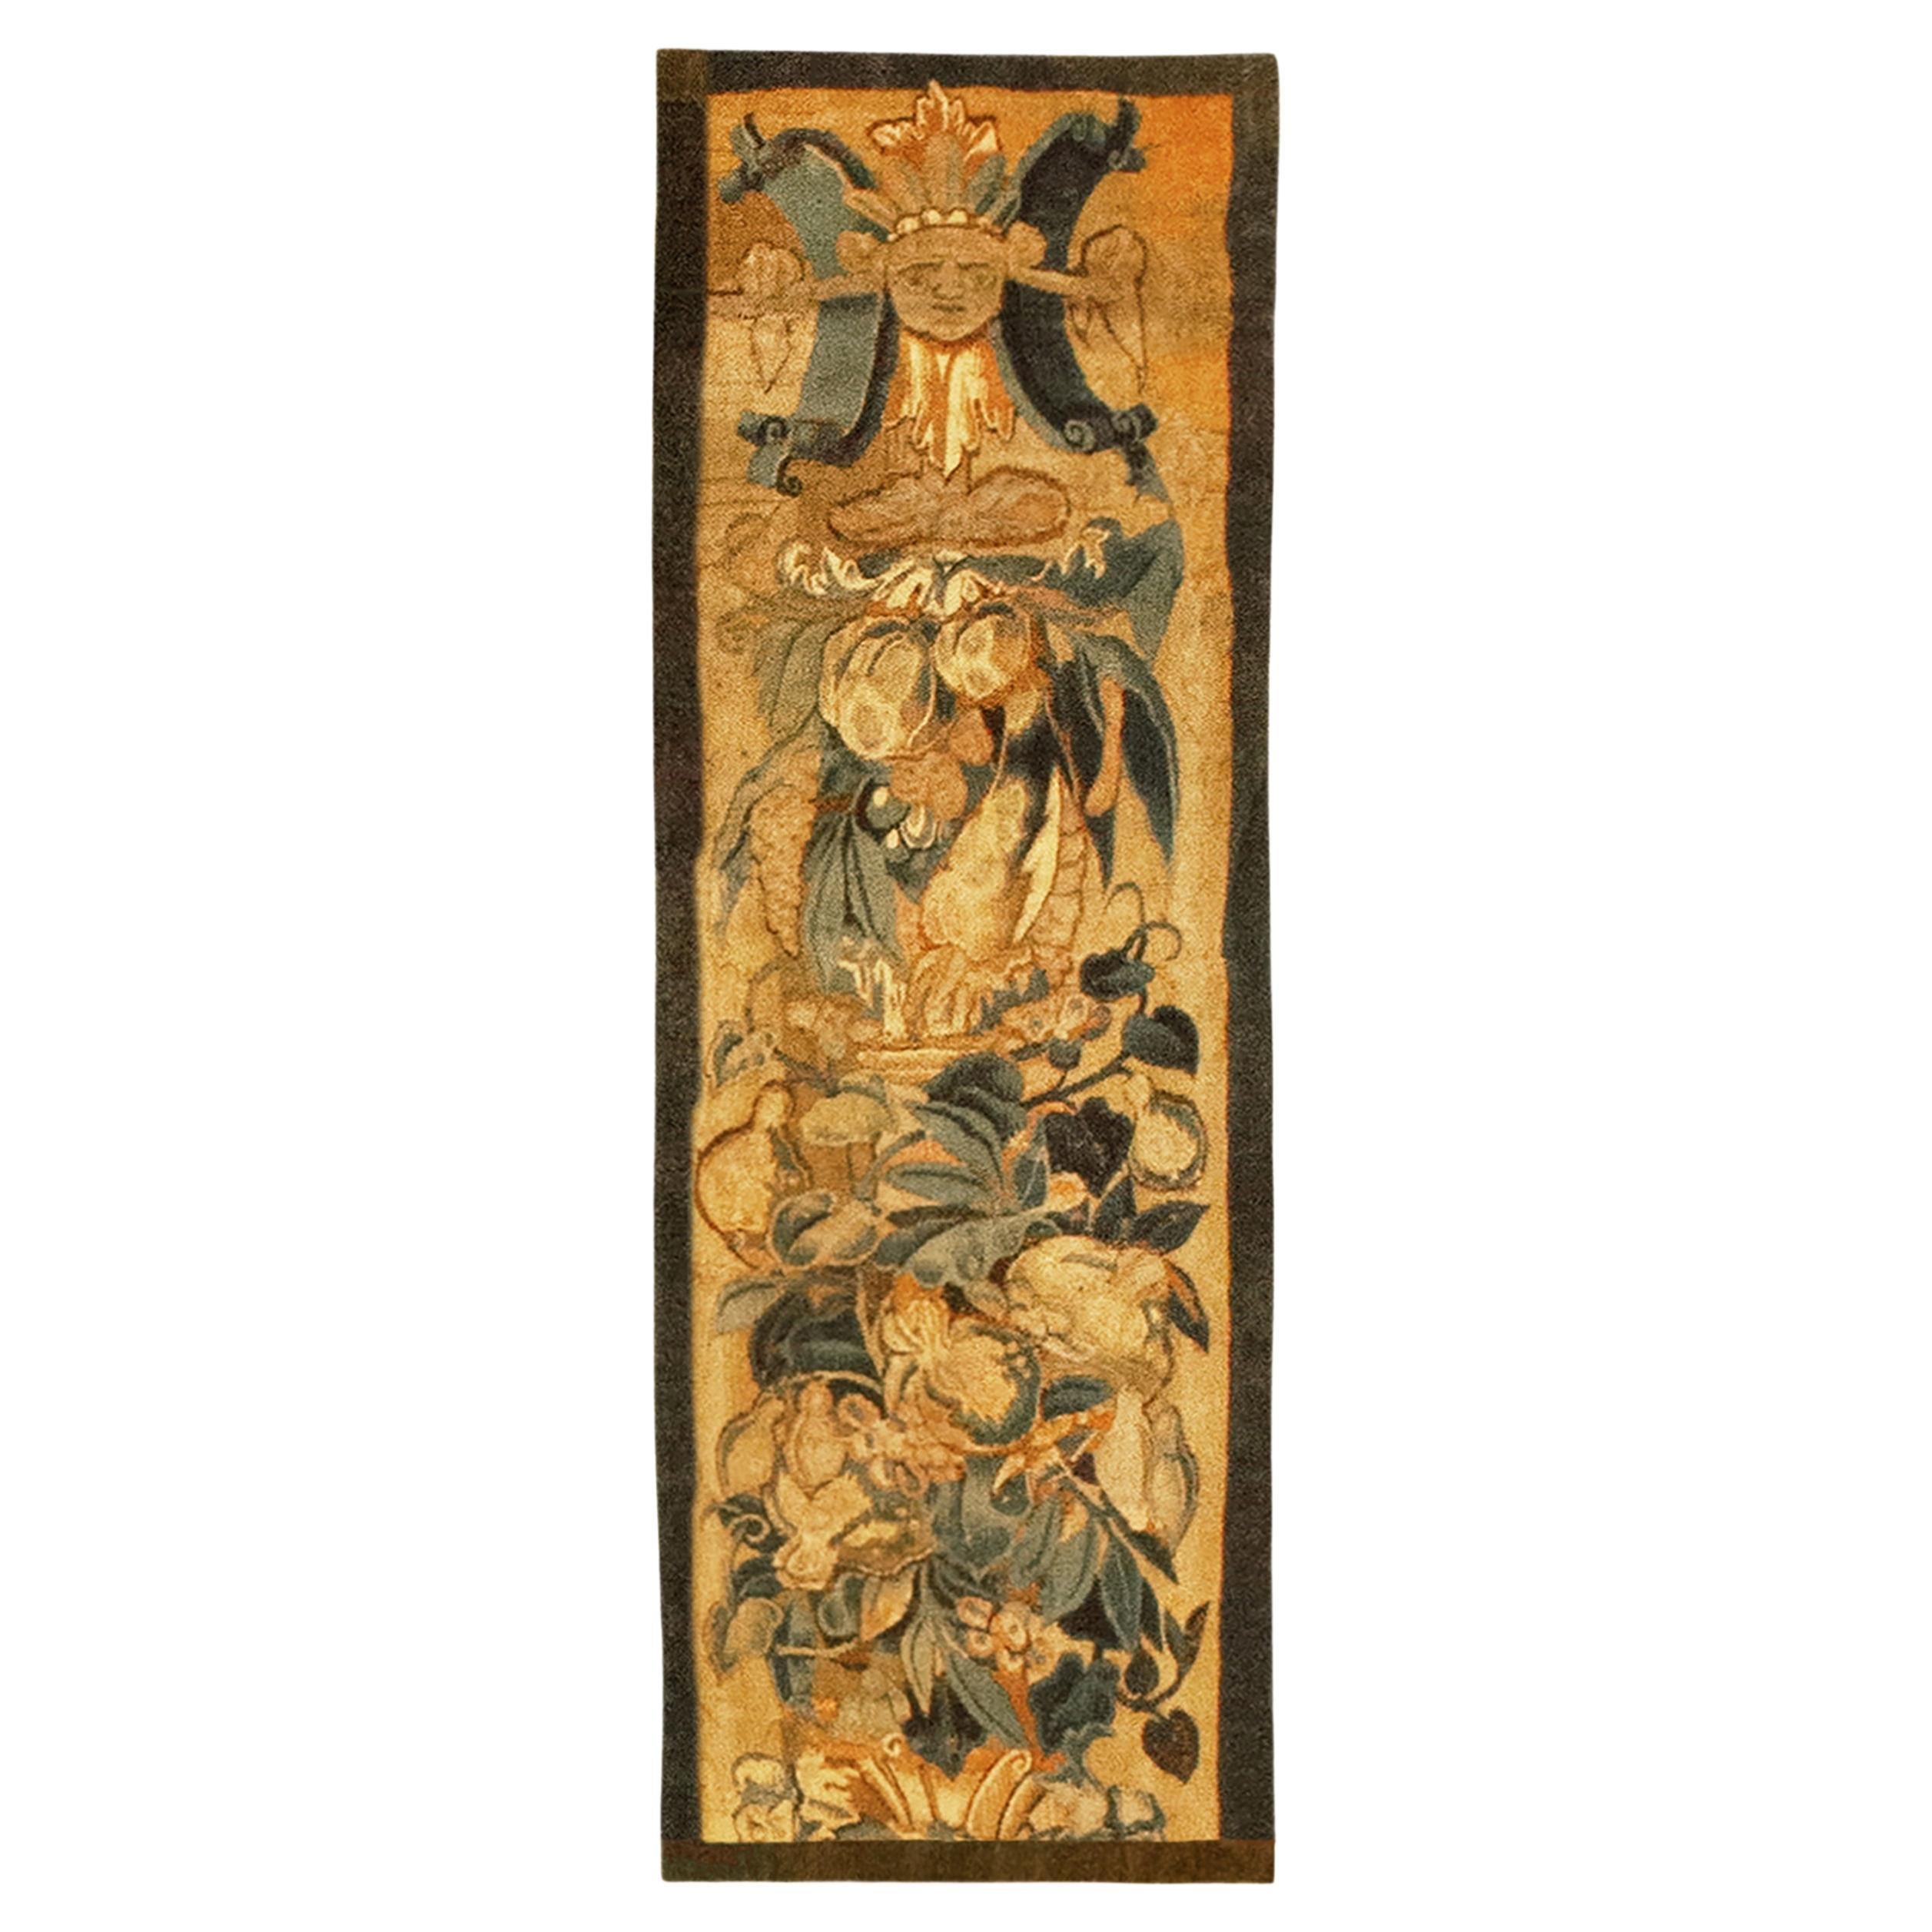 Late 16th Century Flemish Historical Tapestry, Oriented Vertically, with Flowers